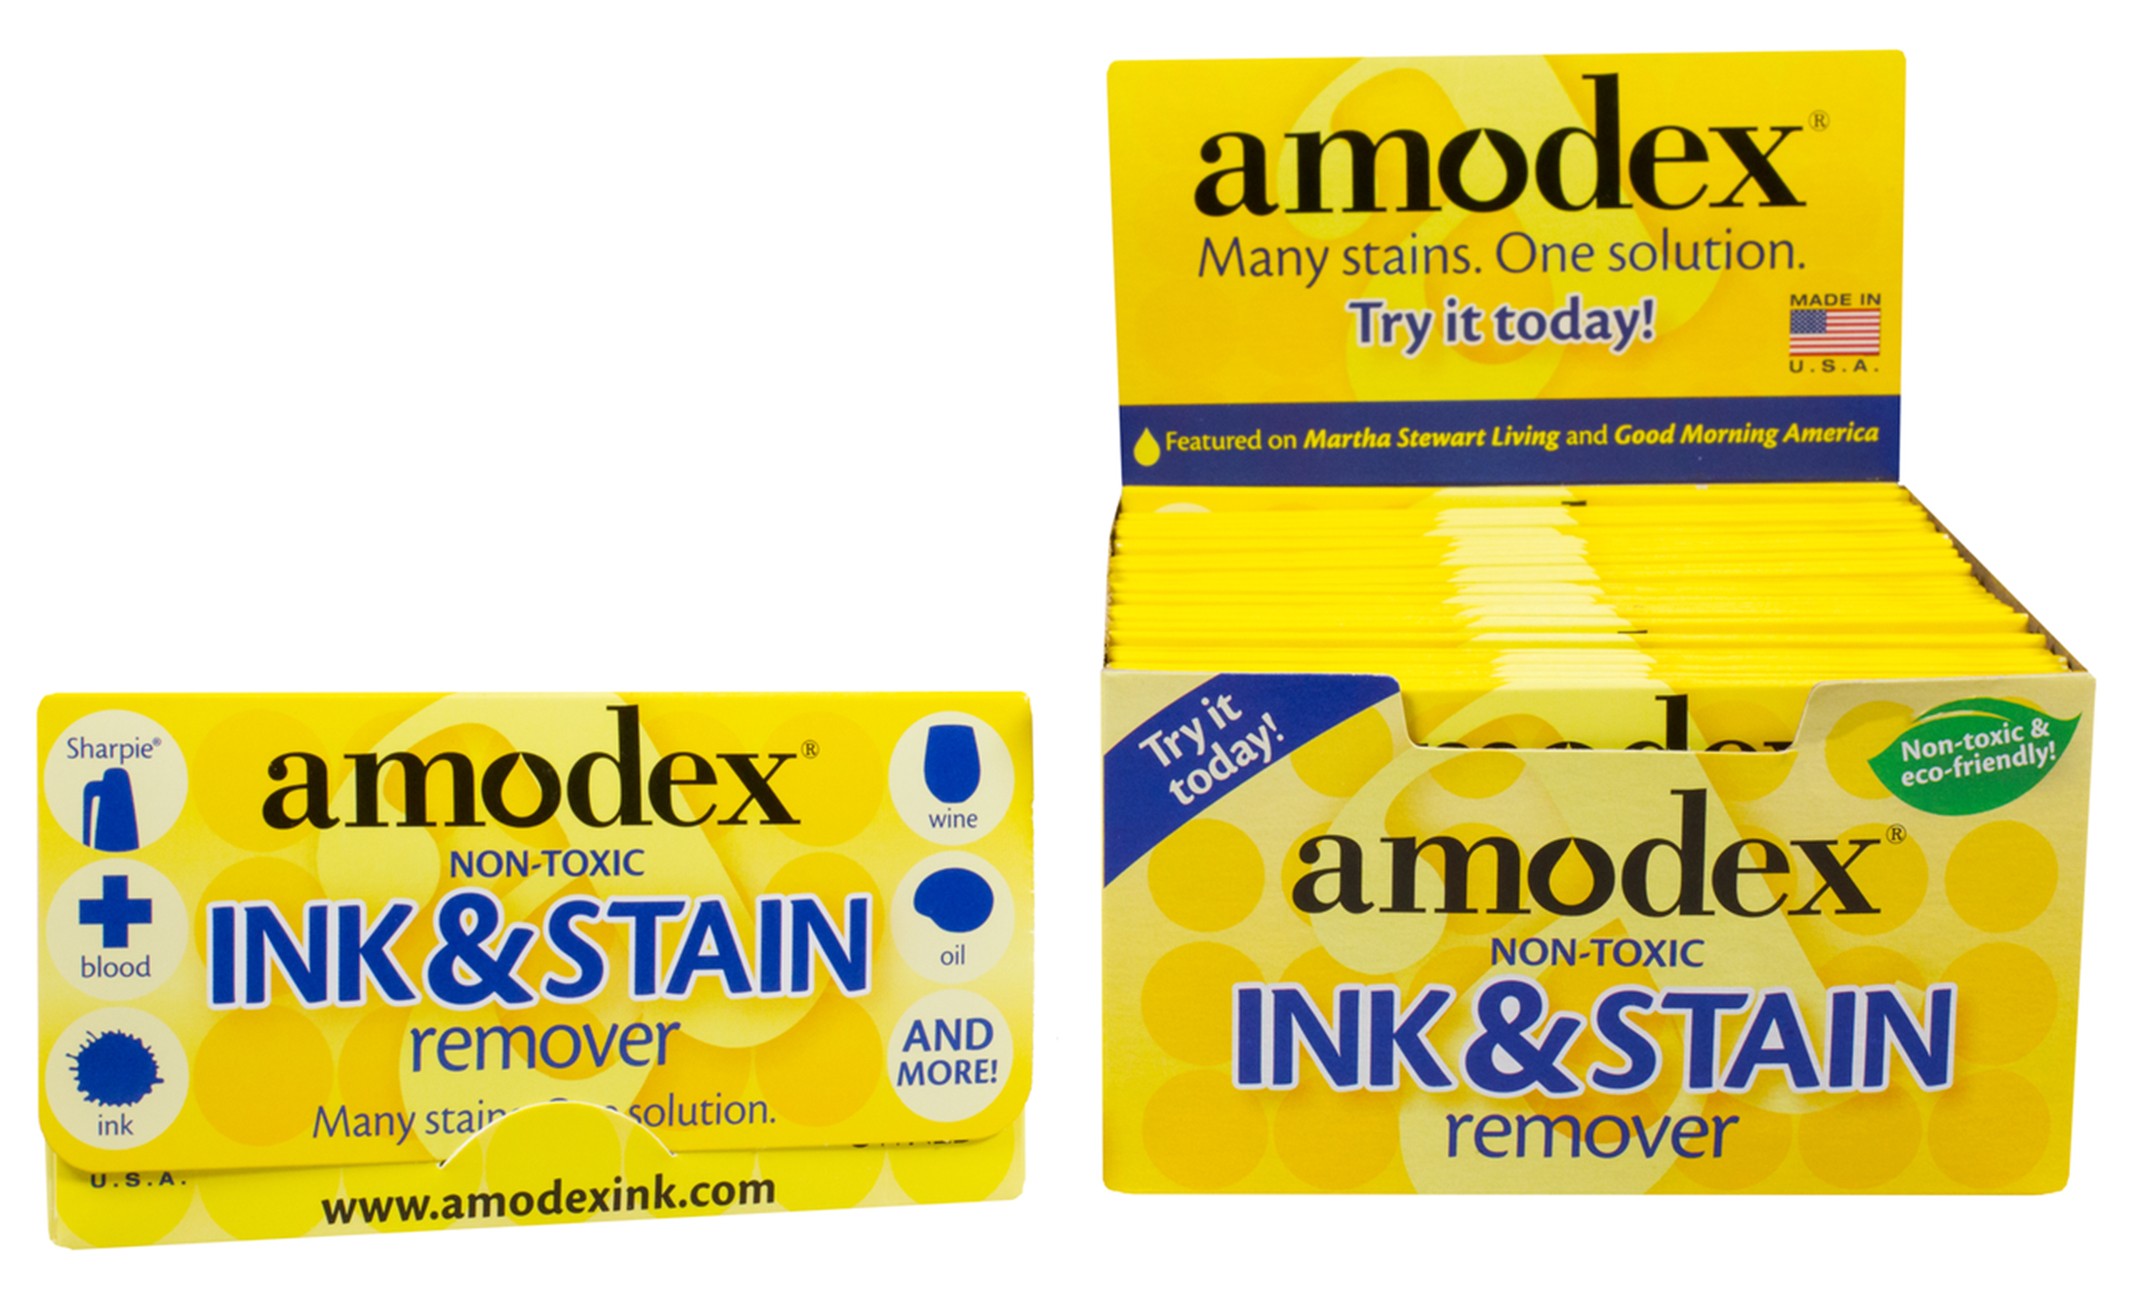 Amodex Non-Toxic Ink & Stain Remover